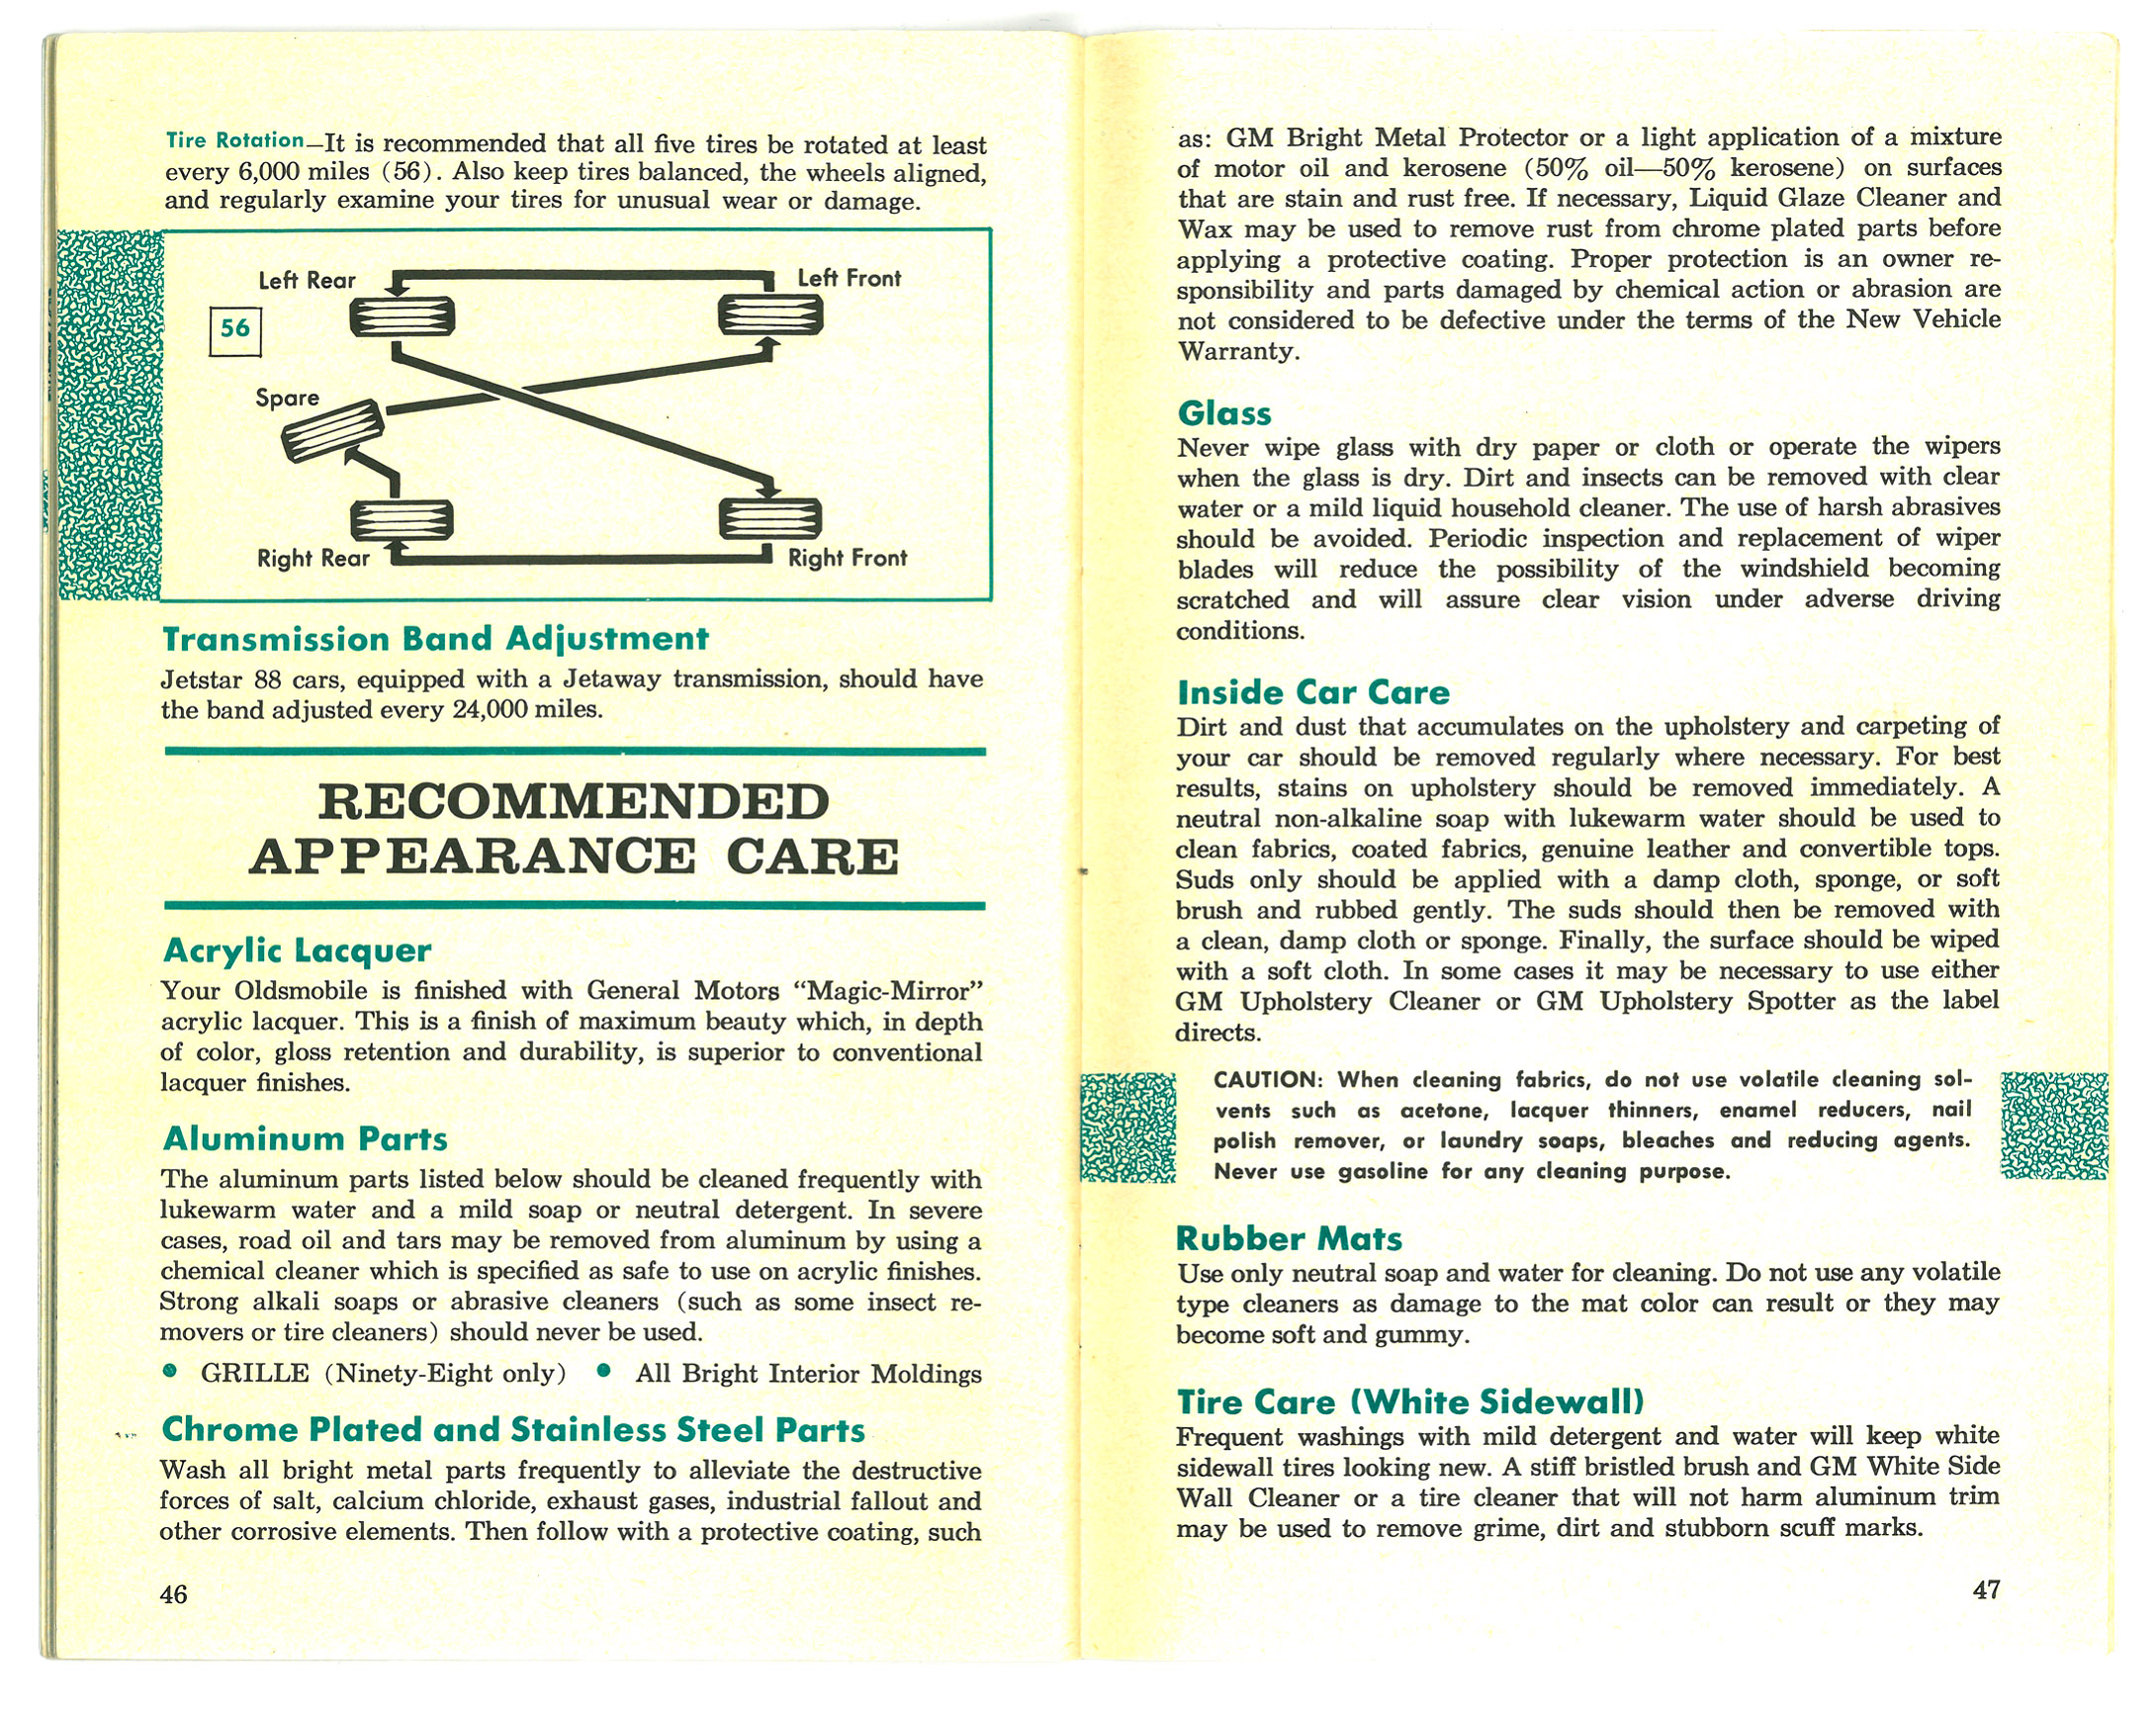 1966_Oldsmobile_owner_operating_manual_Page_25